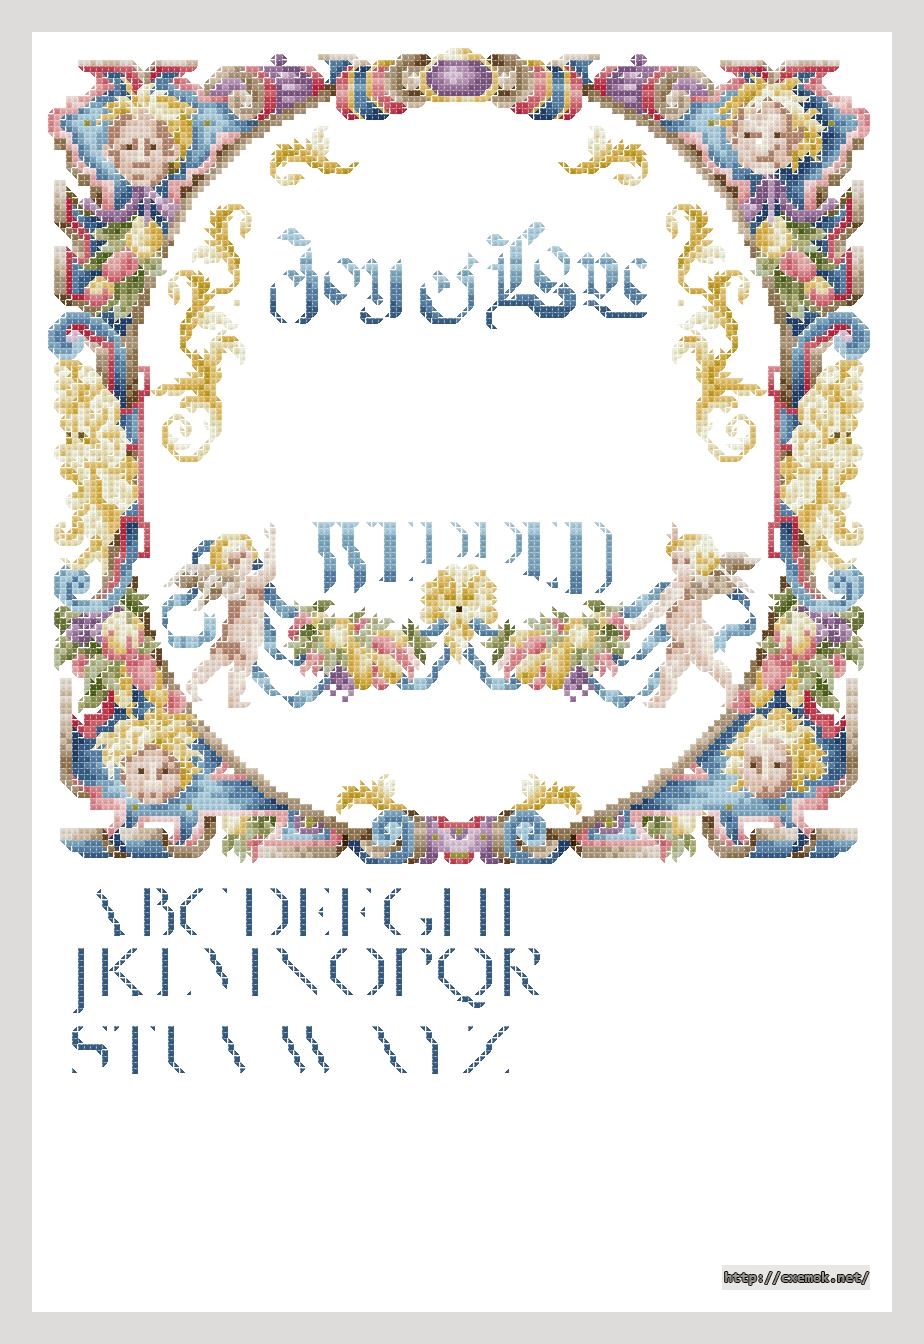 Download embroidery patterns by cross-stitch  - Joy & love wedding sampler, author 